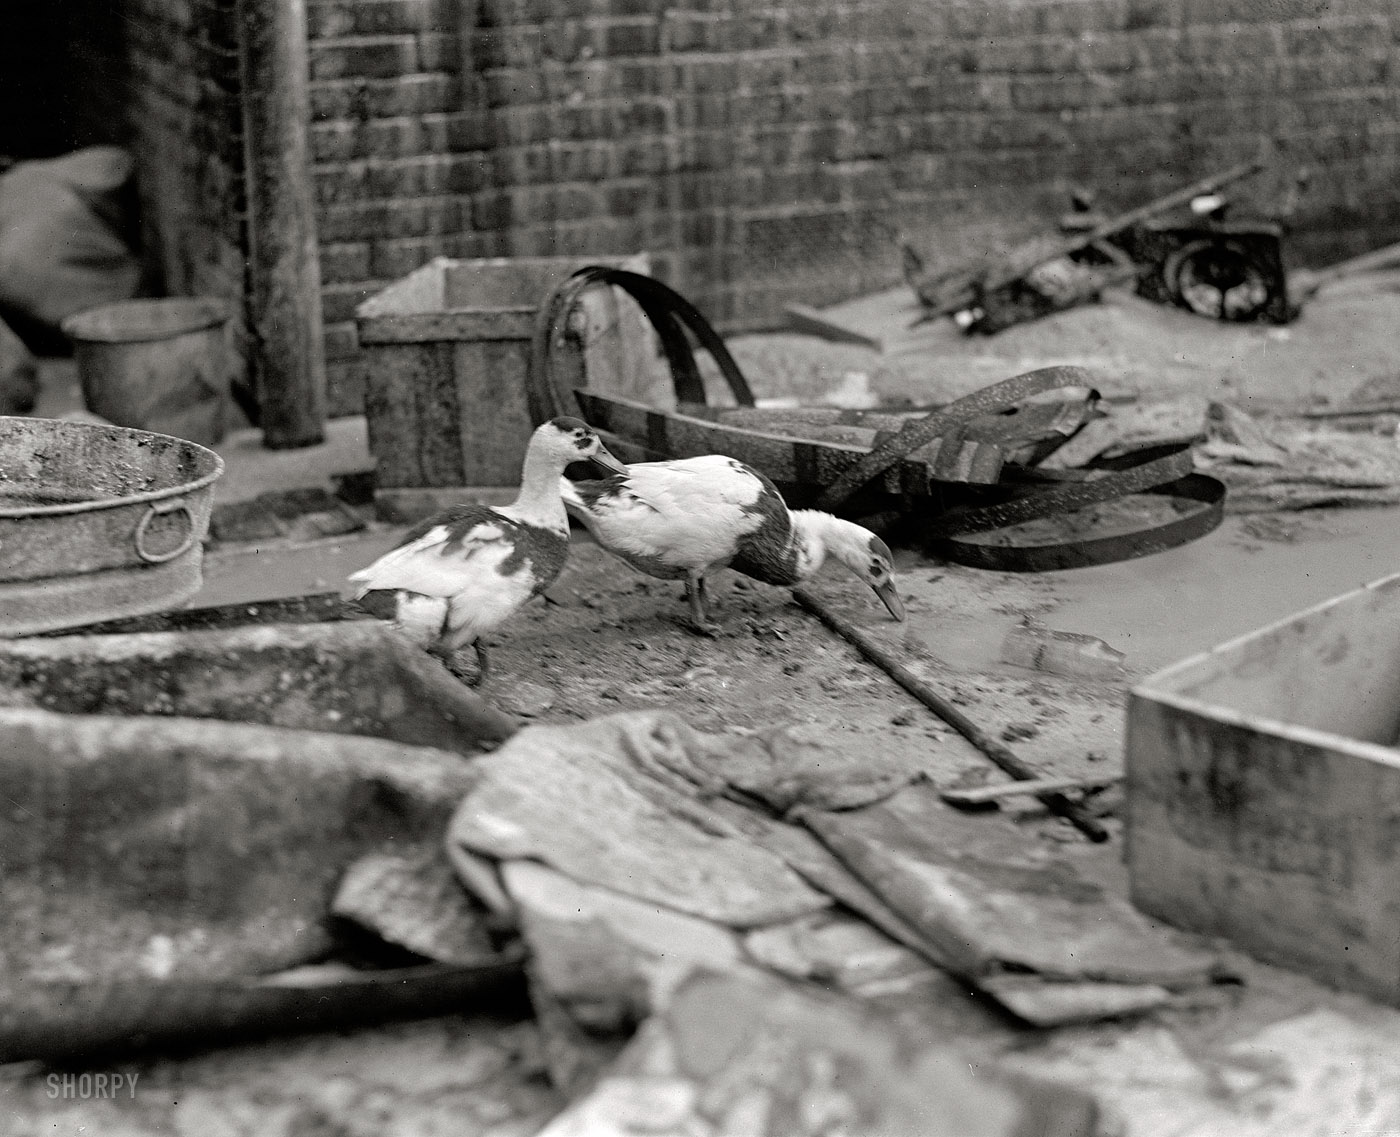 Sept. 5, 1925. "Intoxicated ducks at 611 Yon.[?] Street."  This one's a mystery to me. National Photo Company Collection glass negative. View full size.